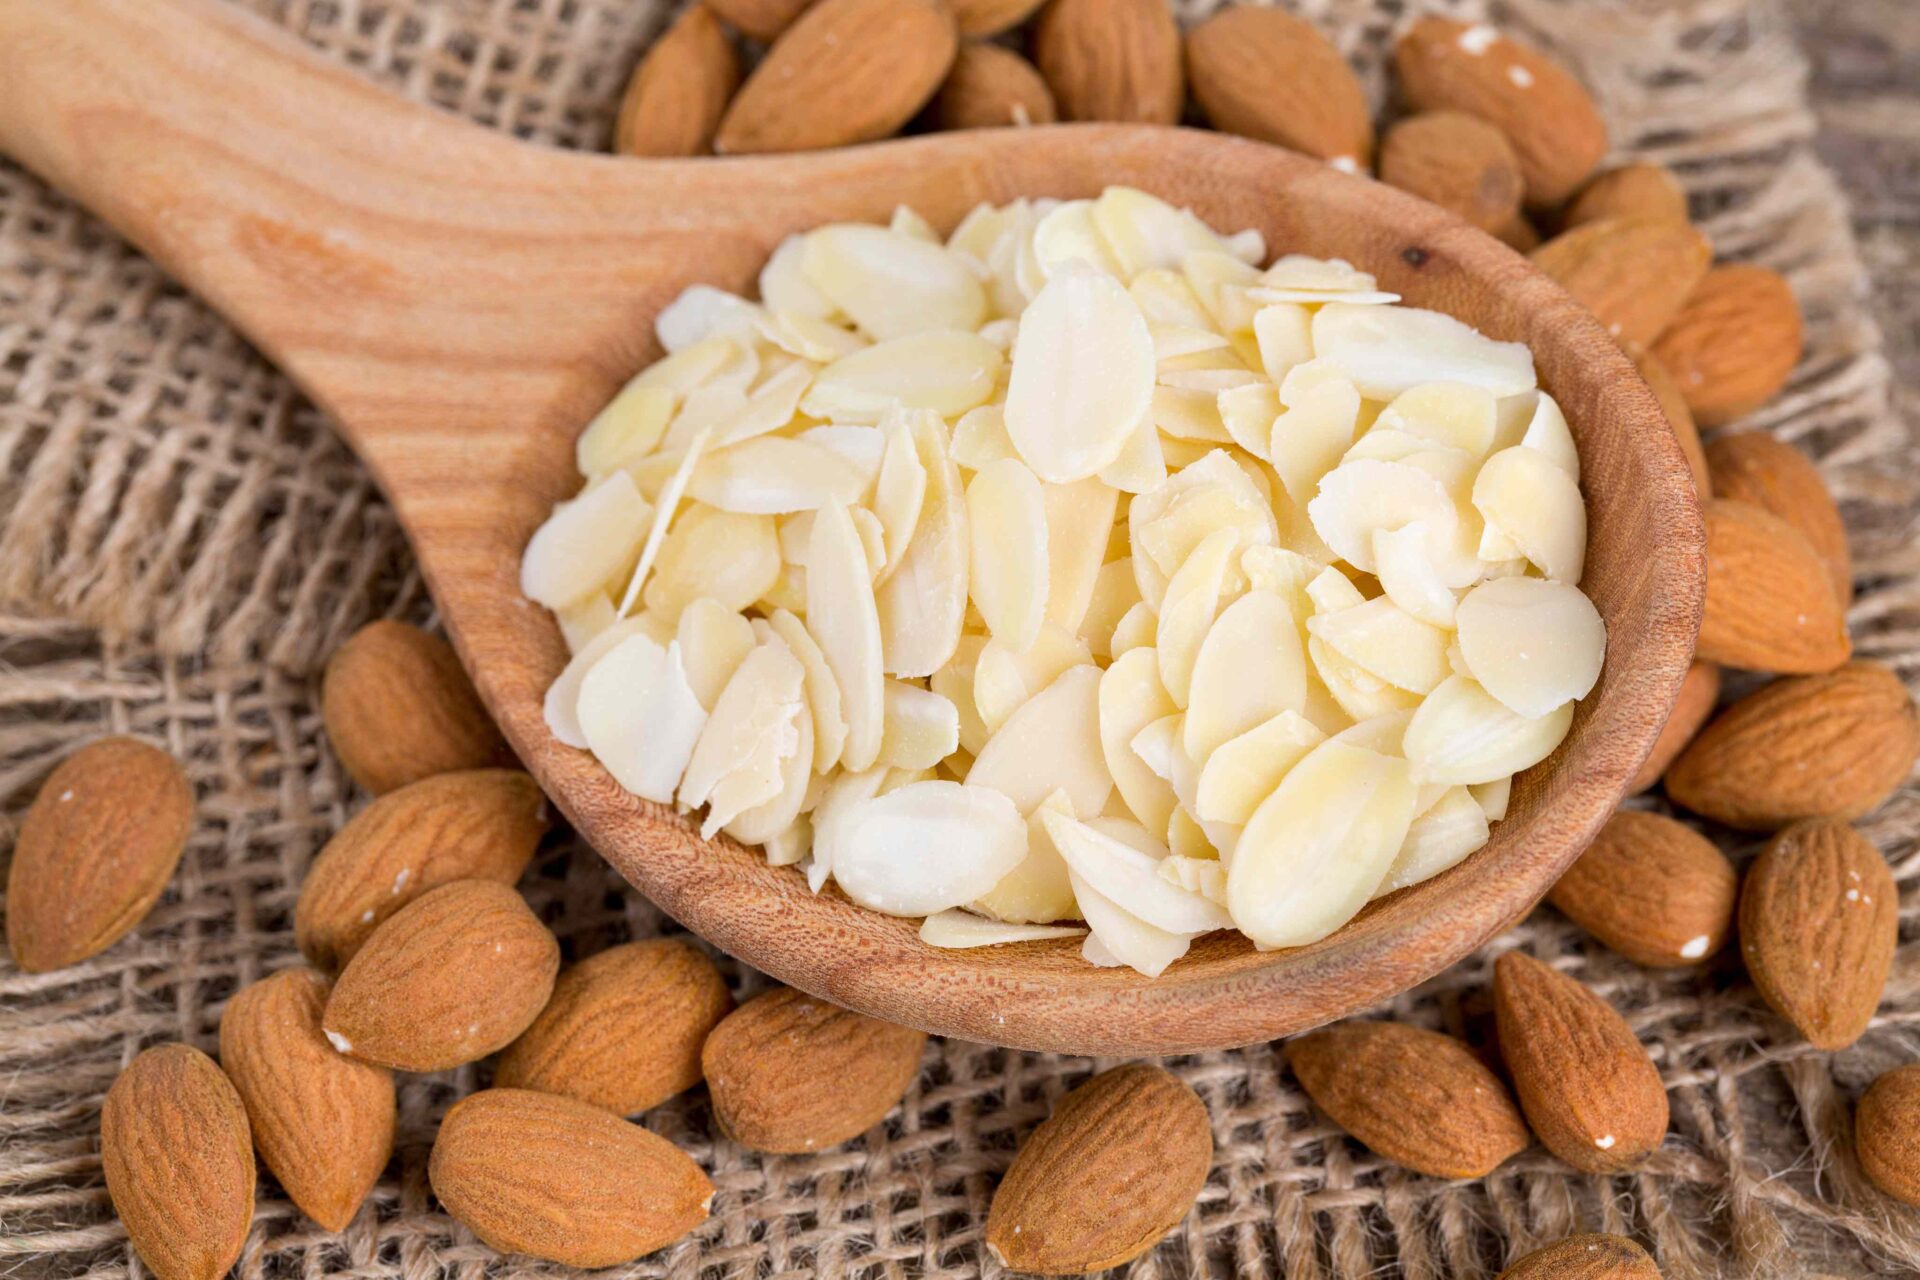 Sliced almonds in a spoon next to raw whole almonds